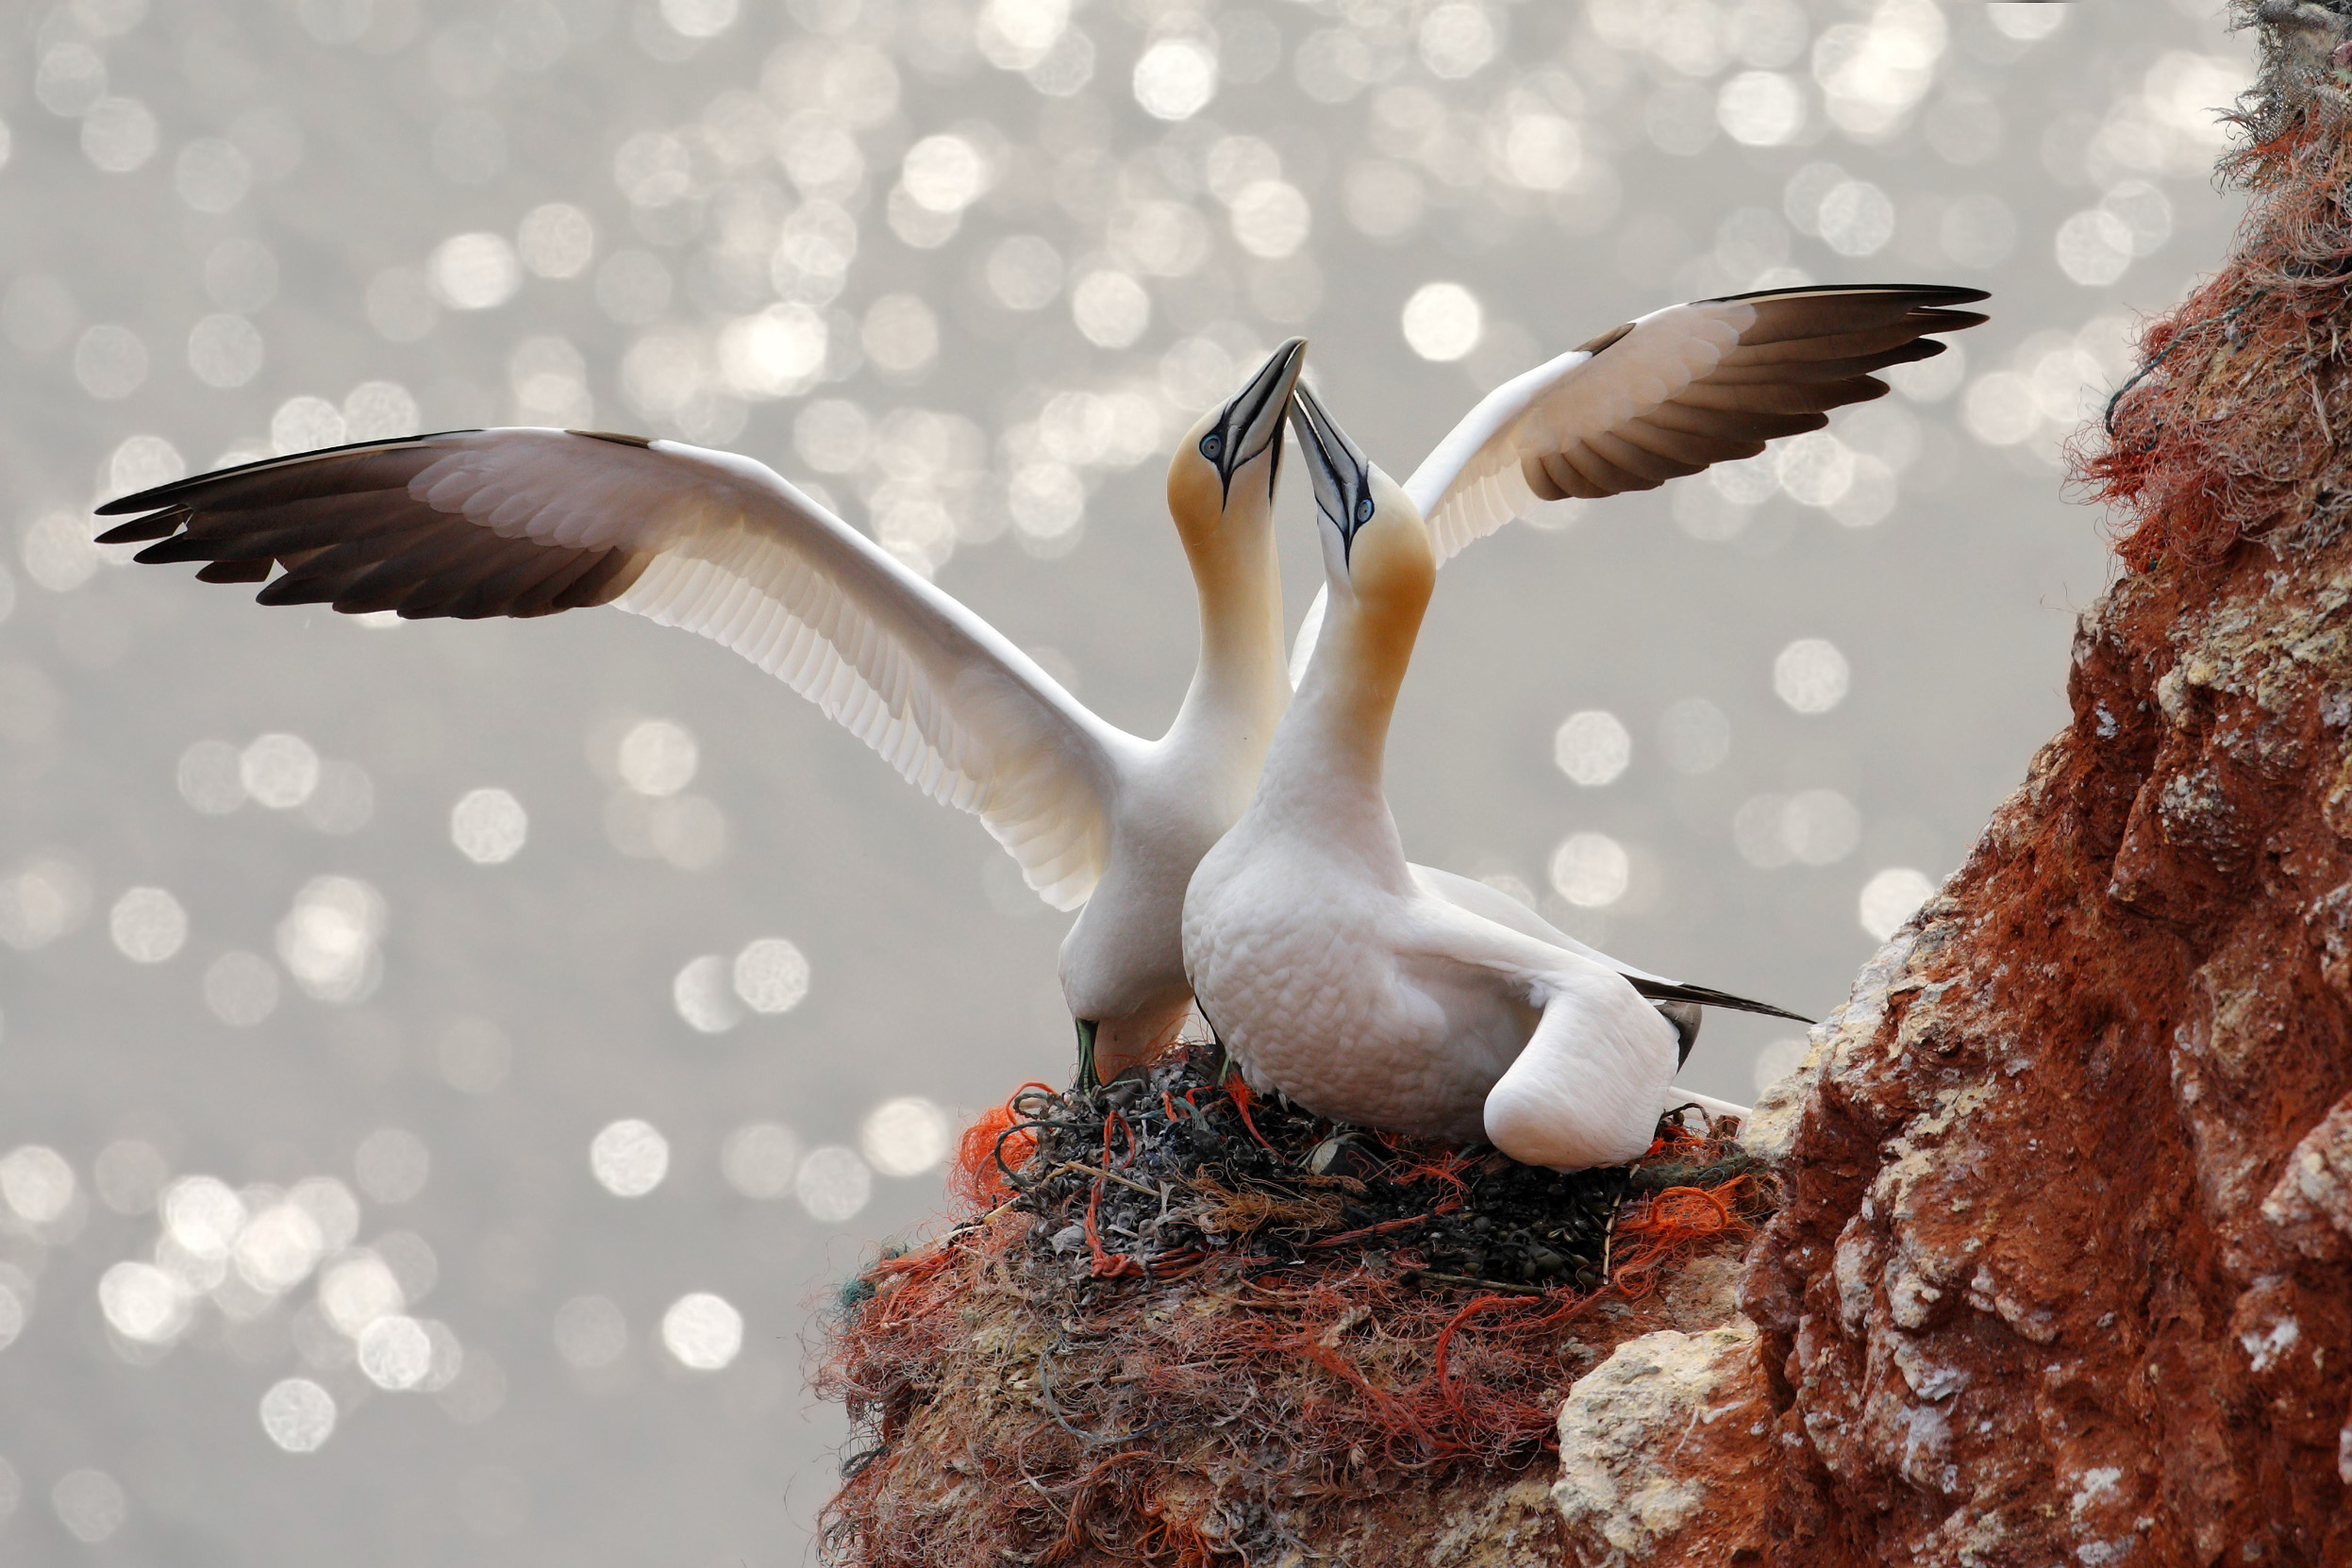 A pair of Gannets on a nest on a cliffs edge next to the sea.